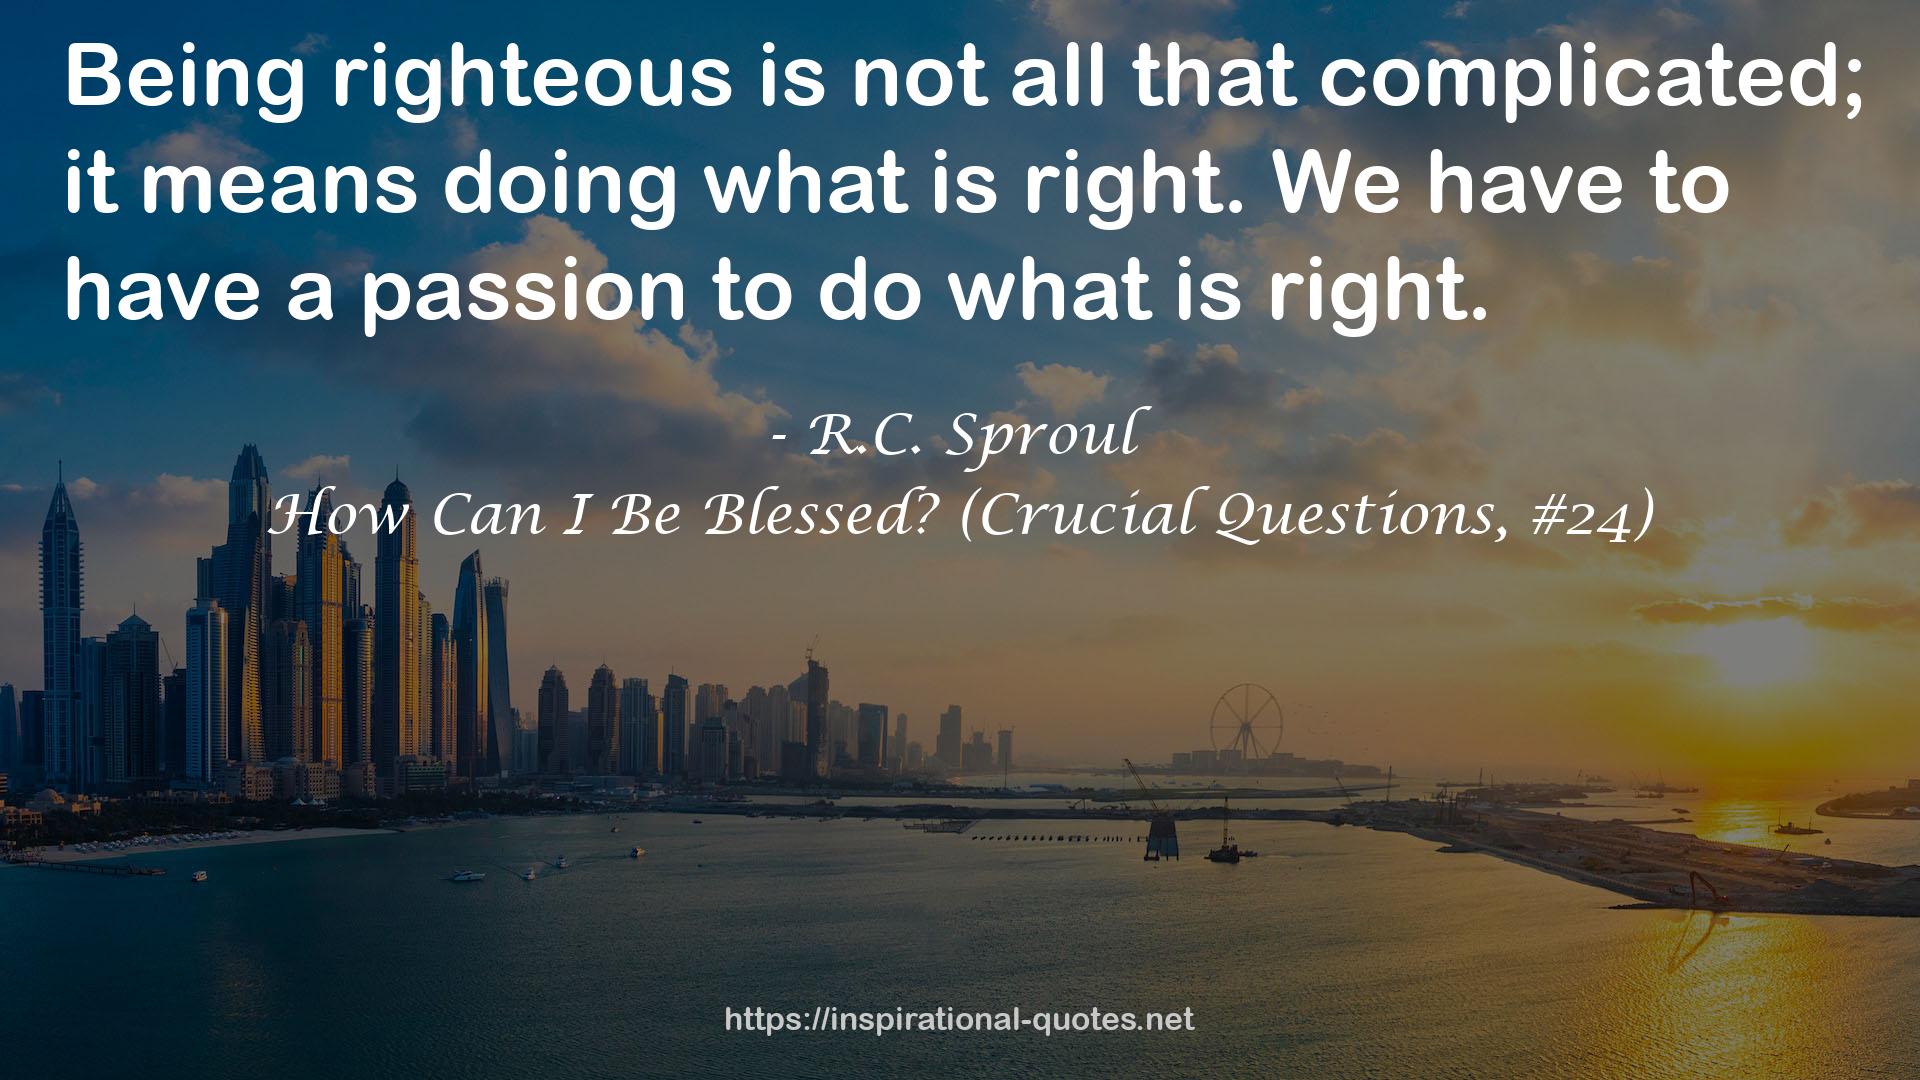 How Can I Be Blessed? (Crucial Questions, #24) QUOTES